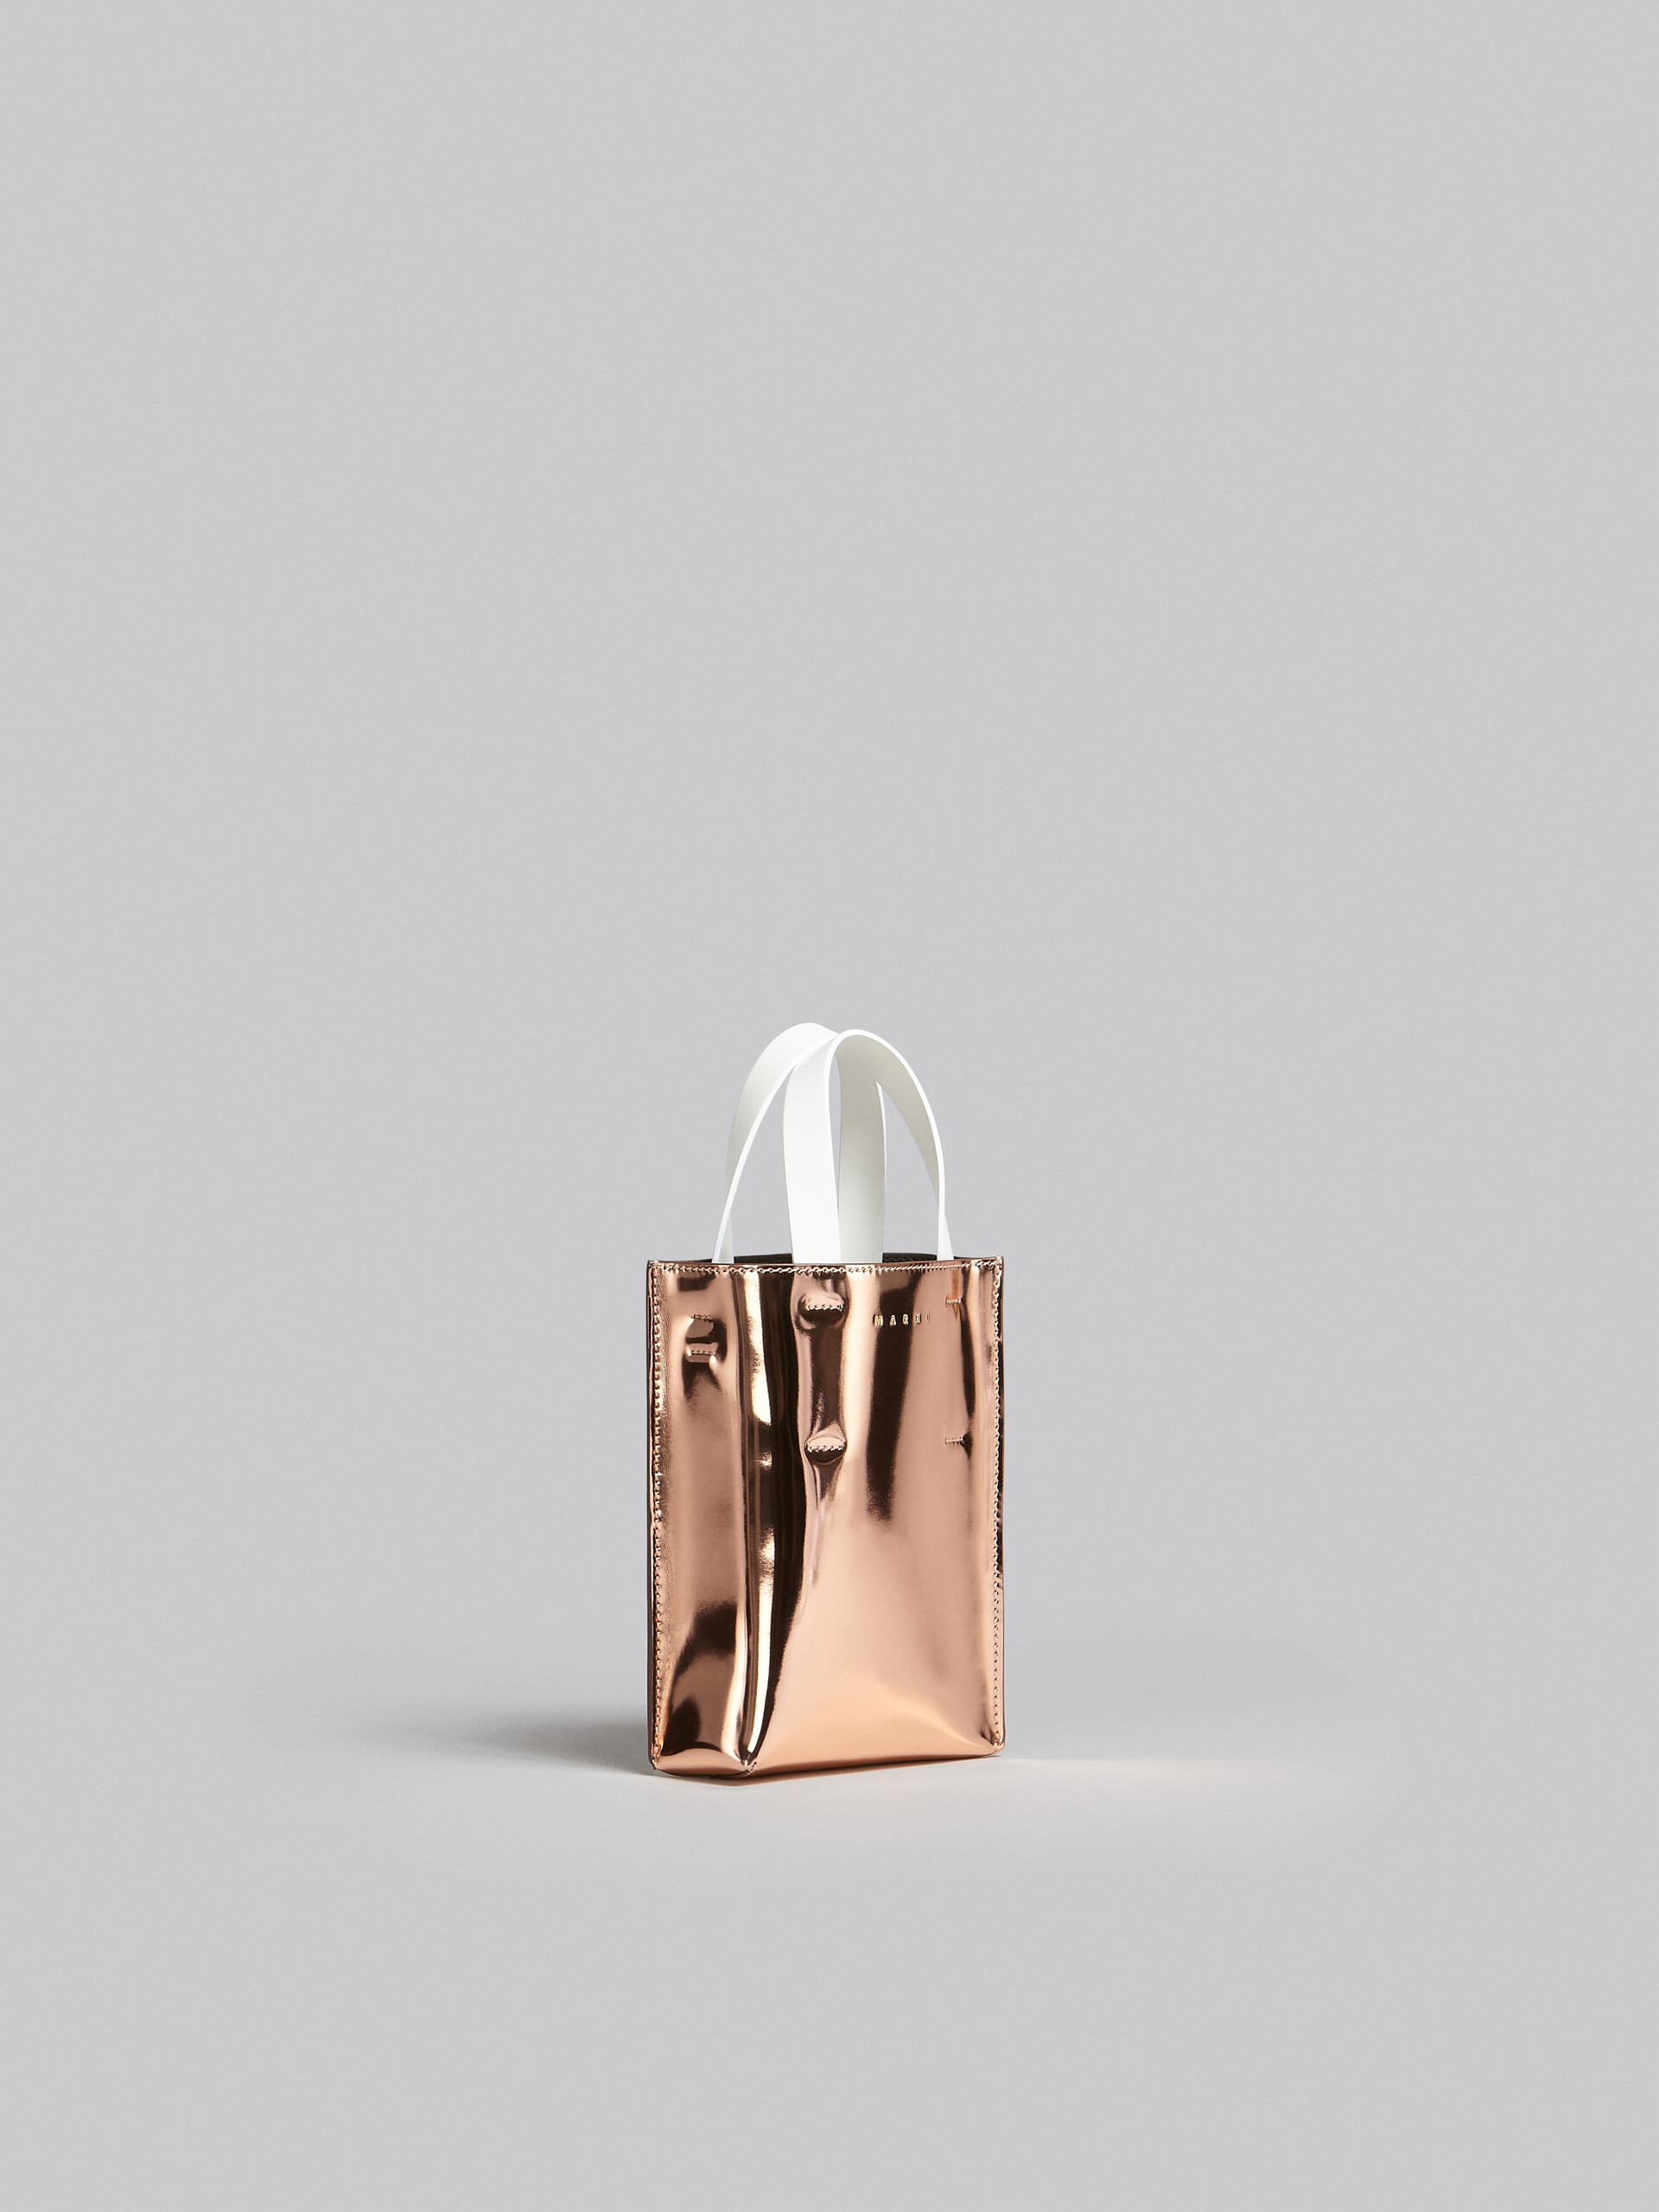 Museo Nano Bag in rose gold mirrored leather - Shopping Bags - Image 6